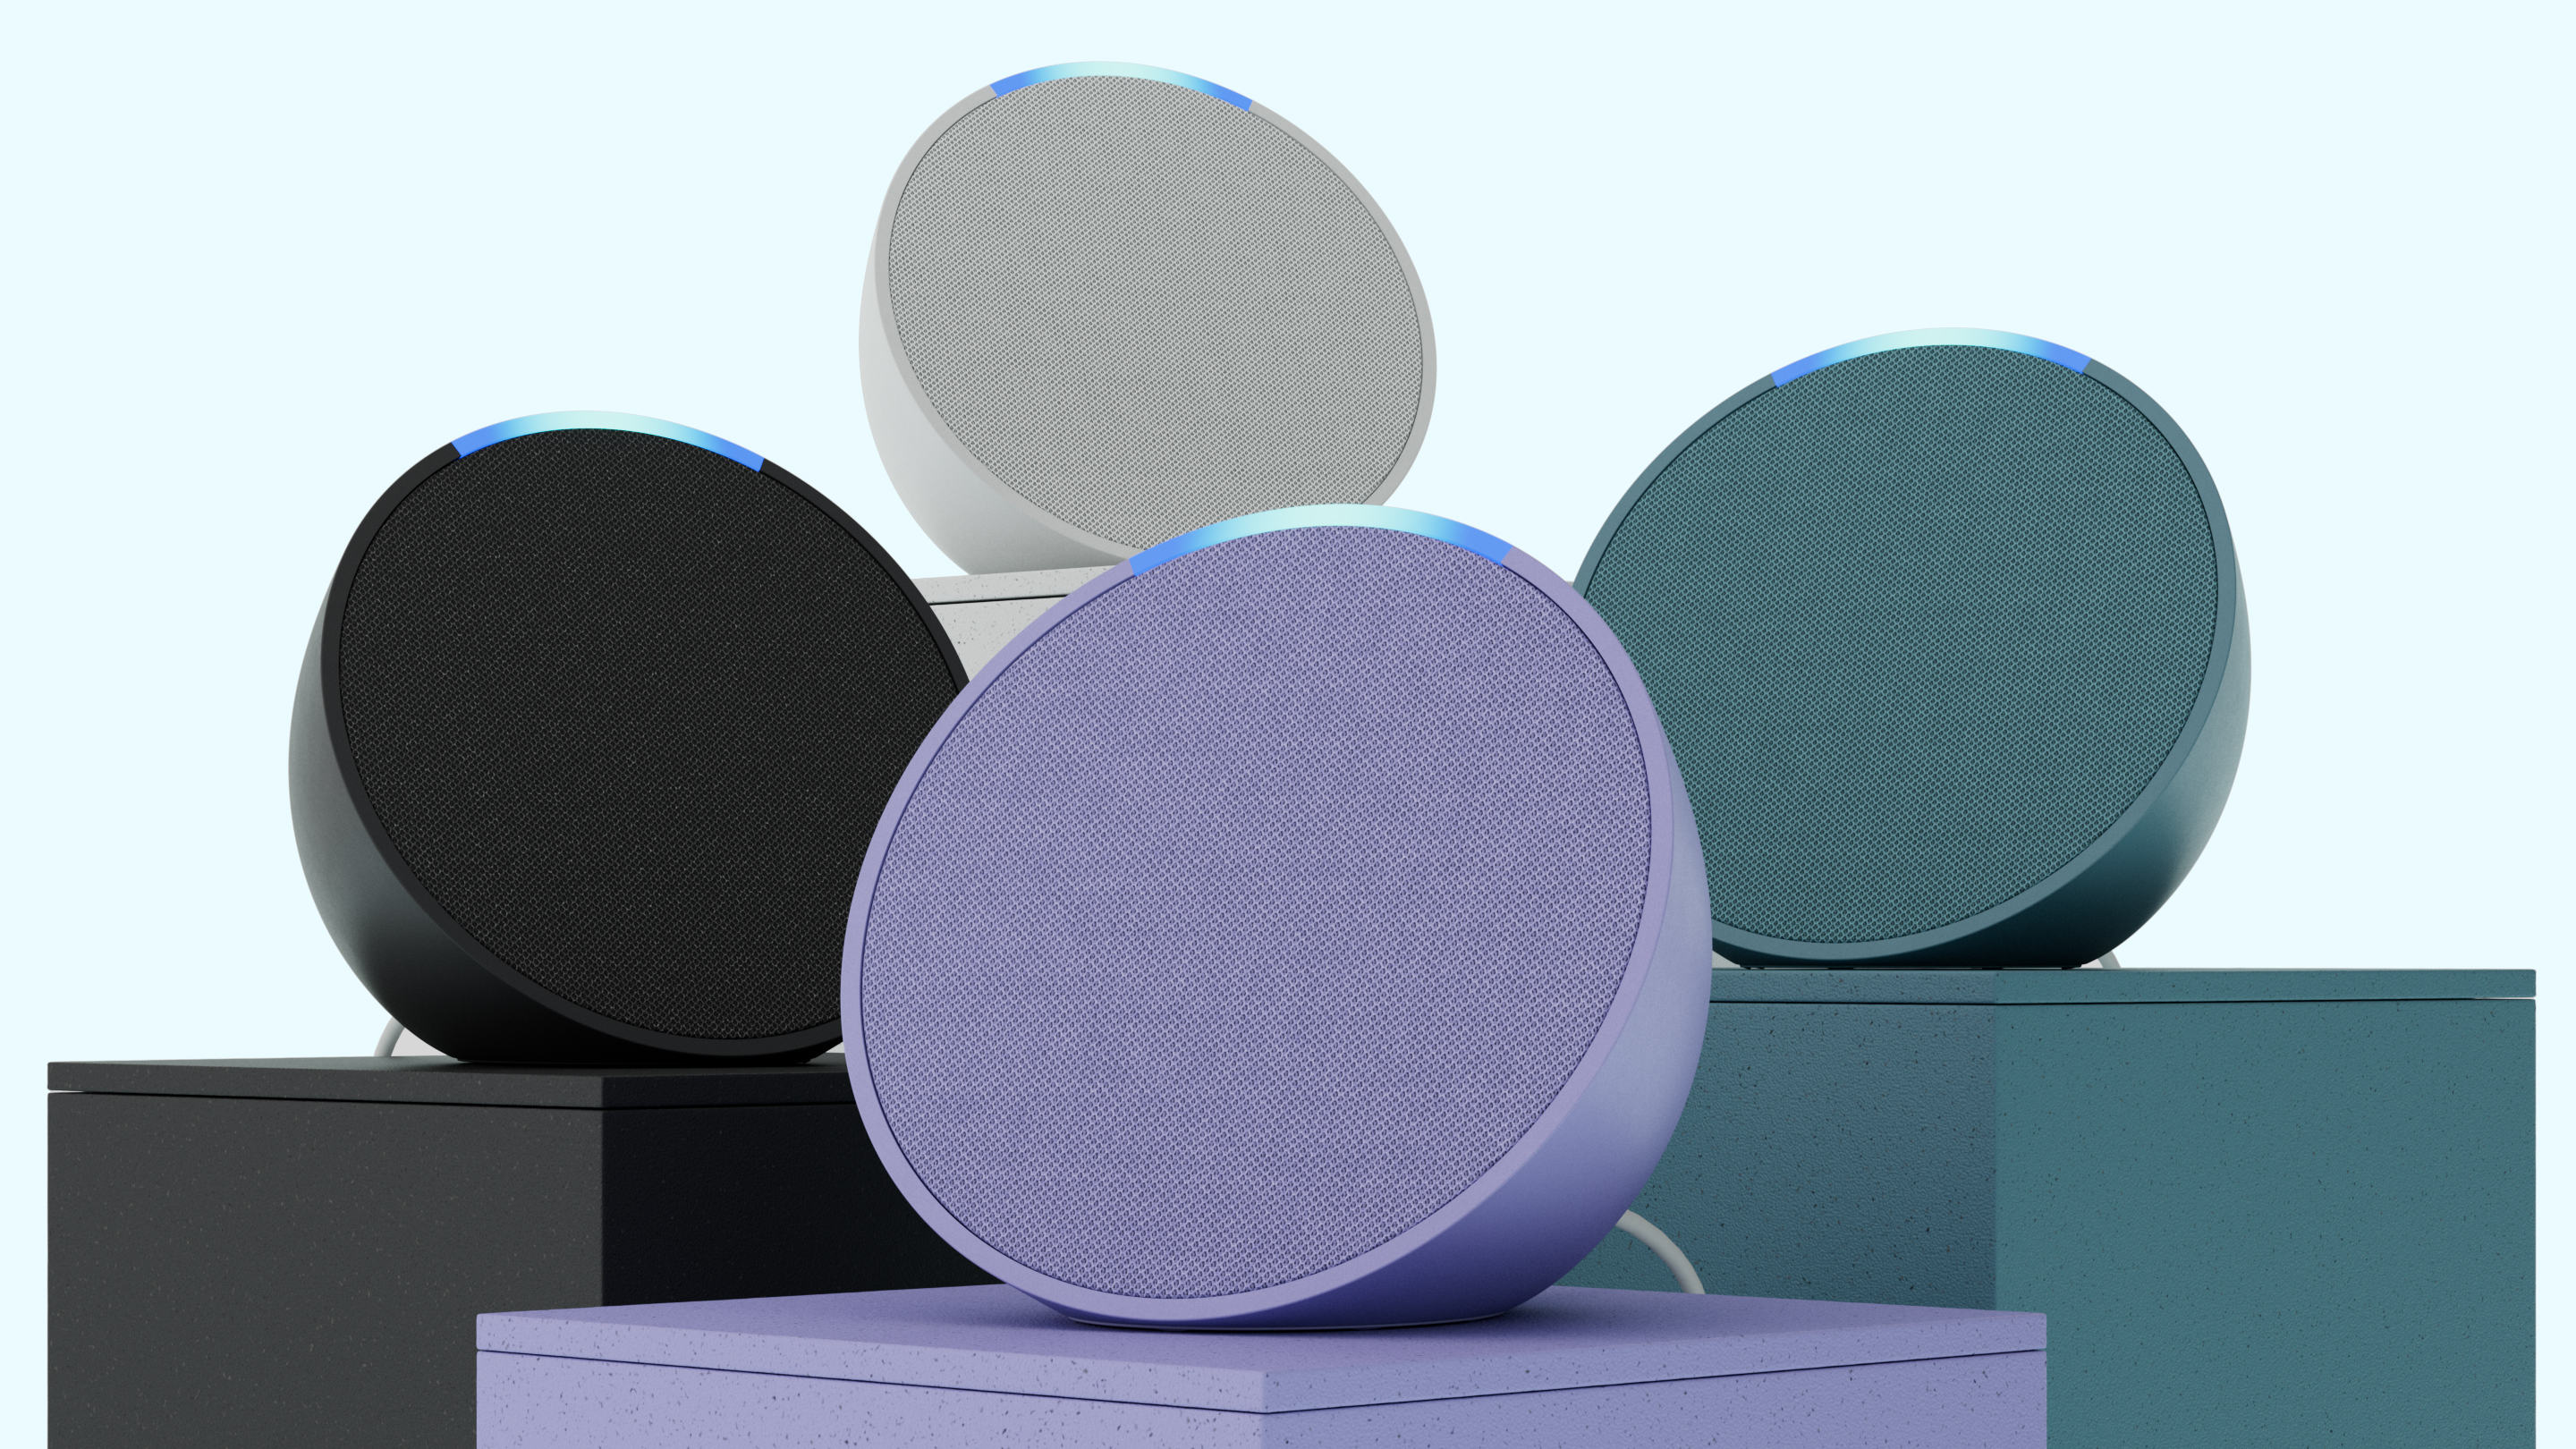 Four different colors of the Amazon Echo Pop speaker sat together